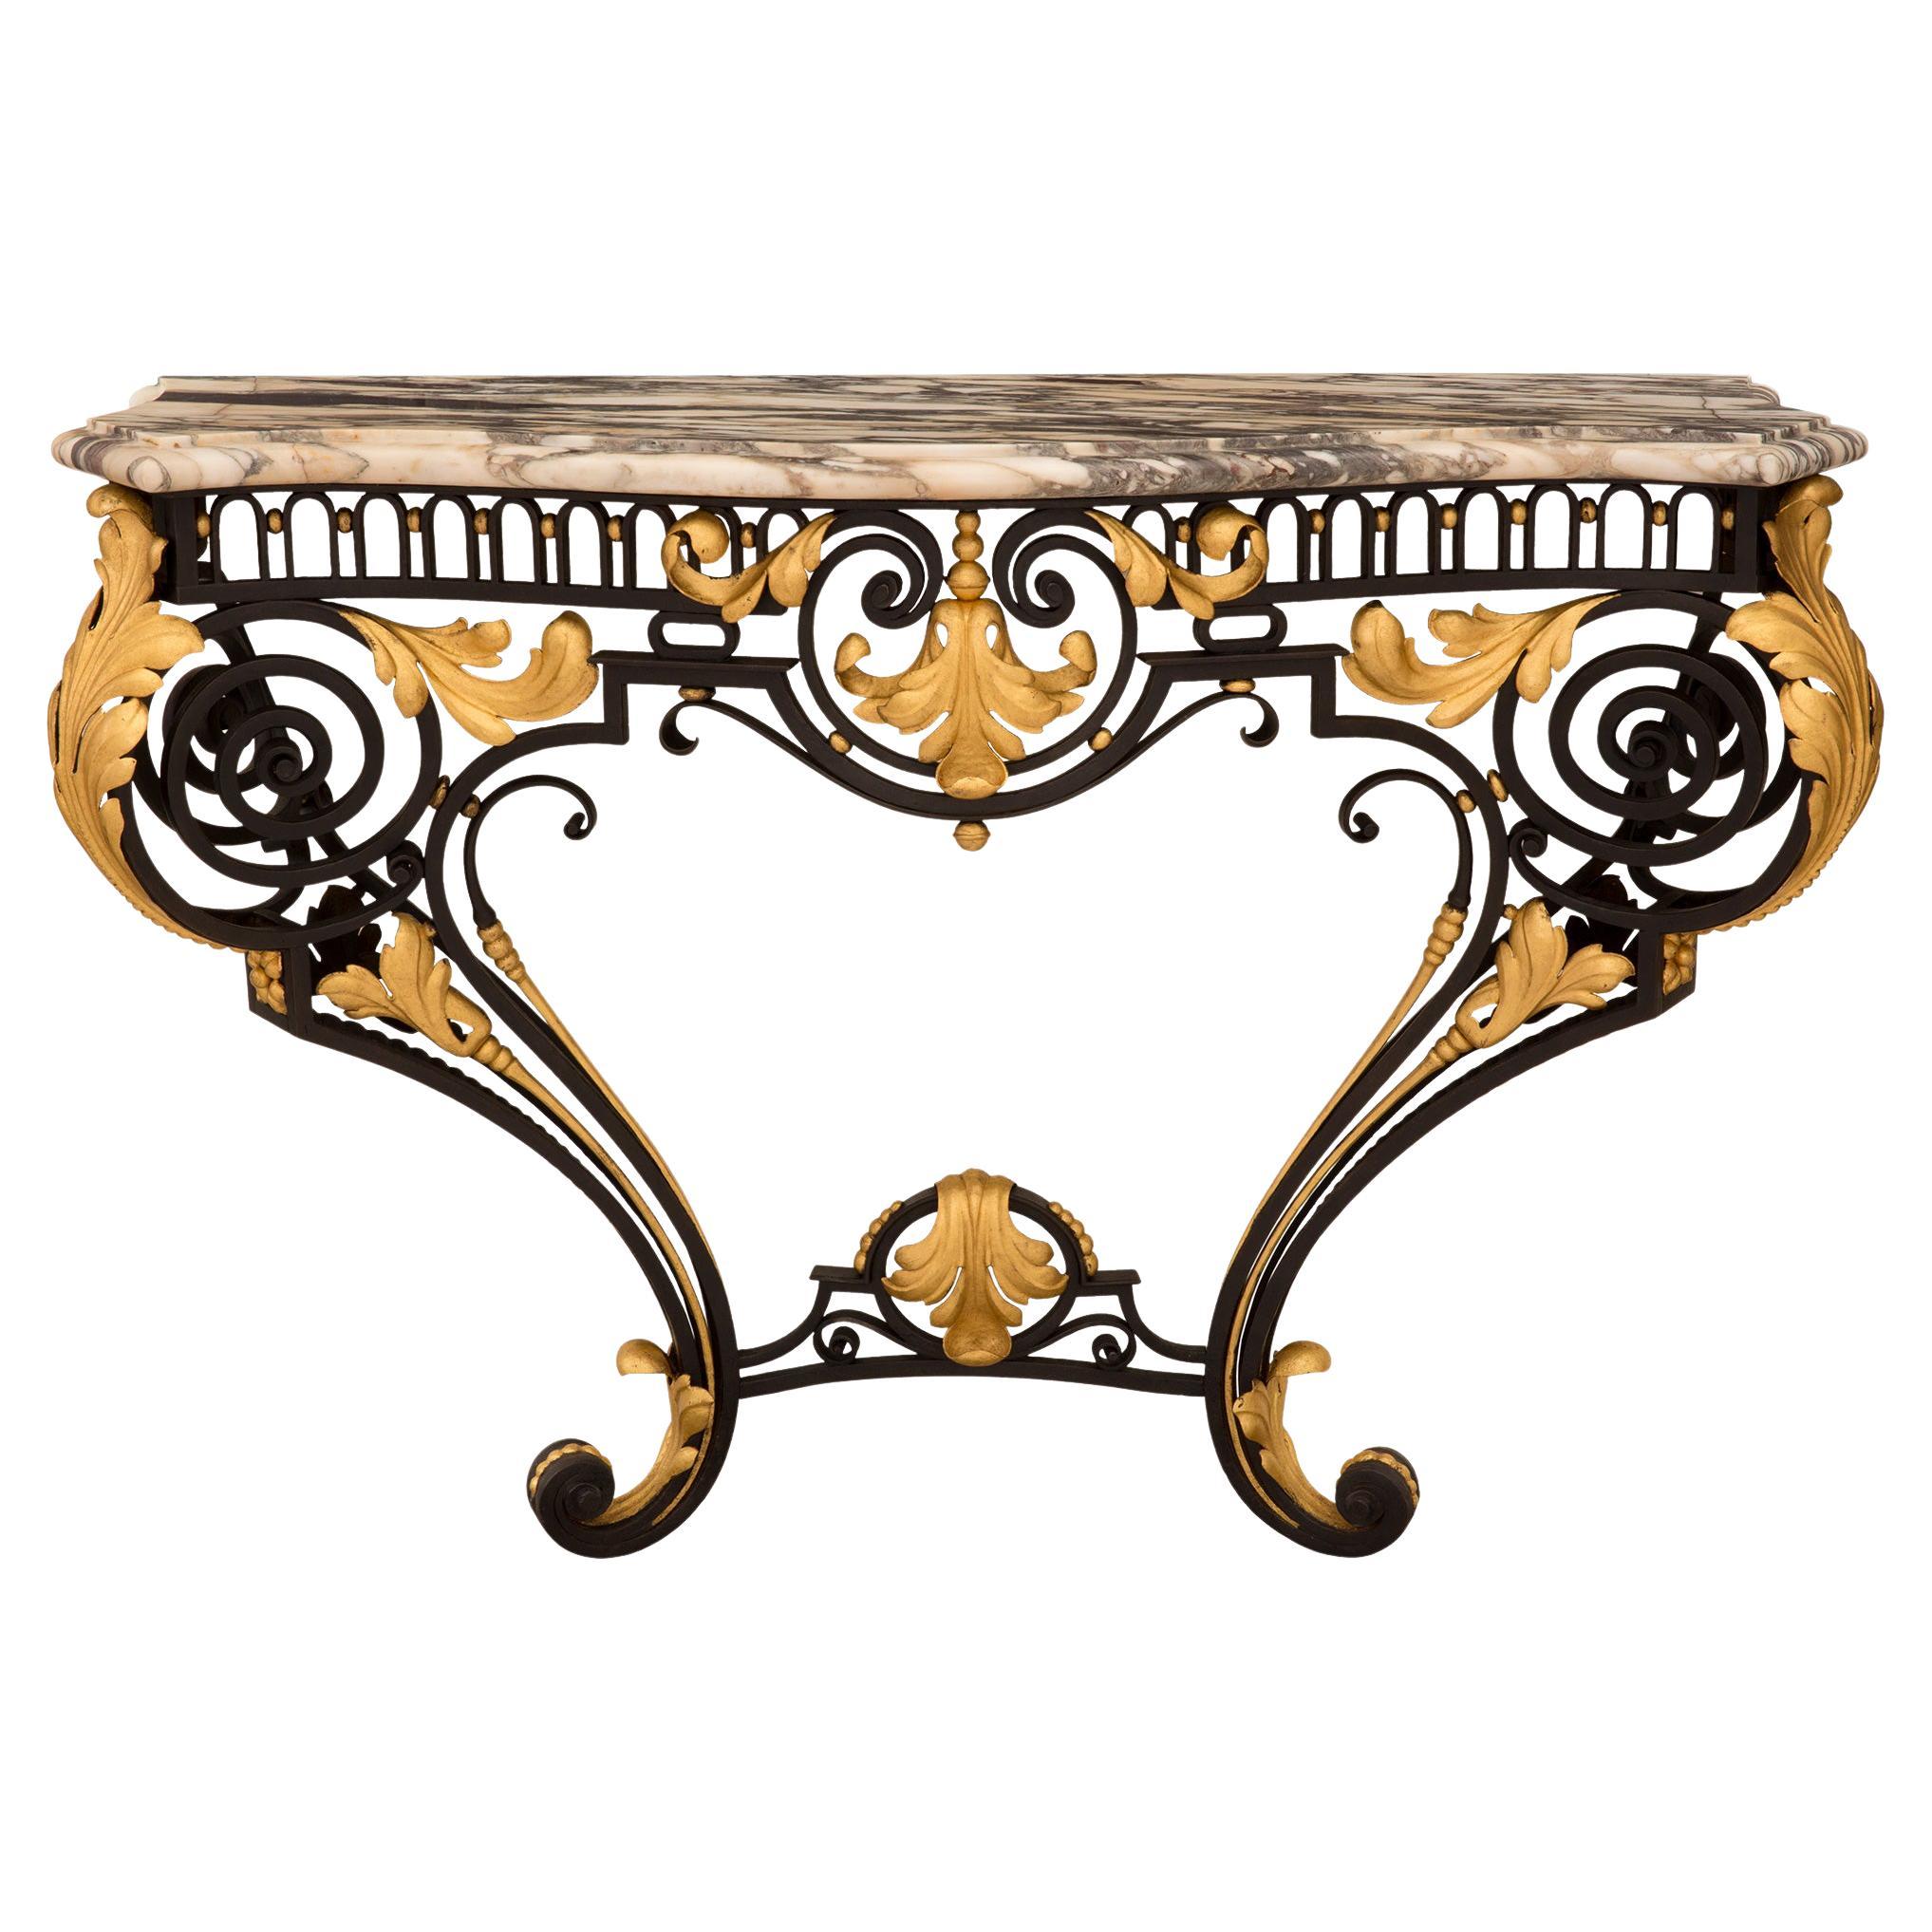 Italian 19th Century Louis XV Style Wrought Iron, Gilt Metal and Marble Console